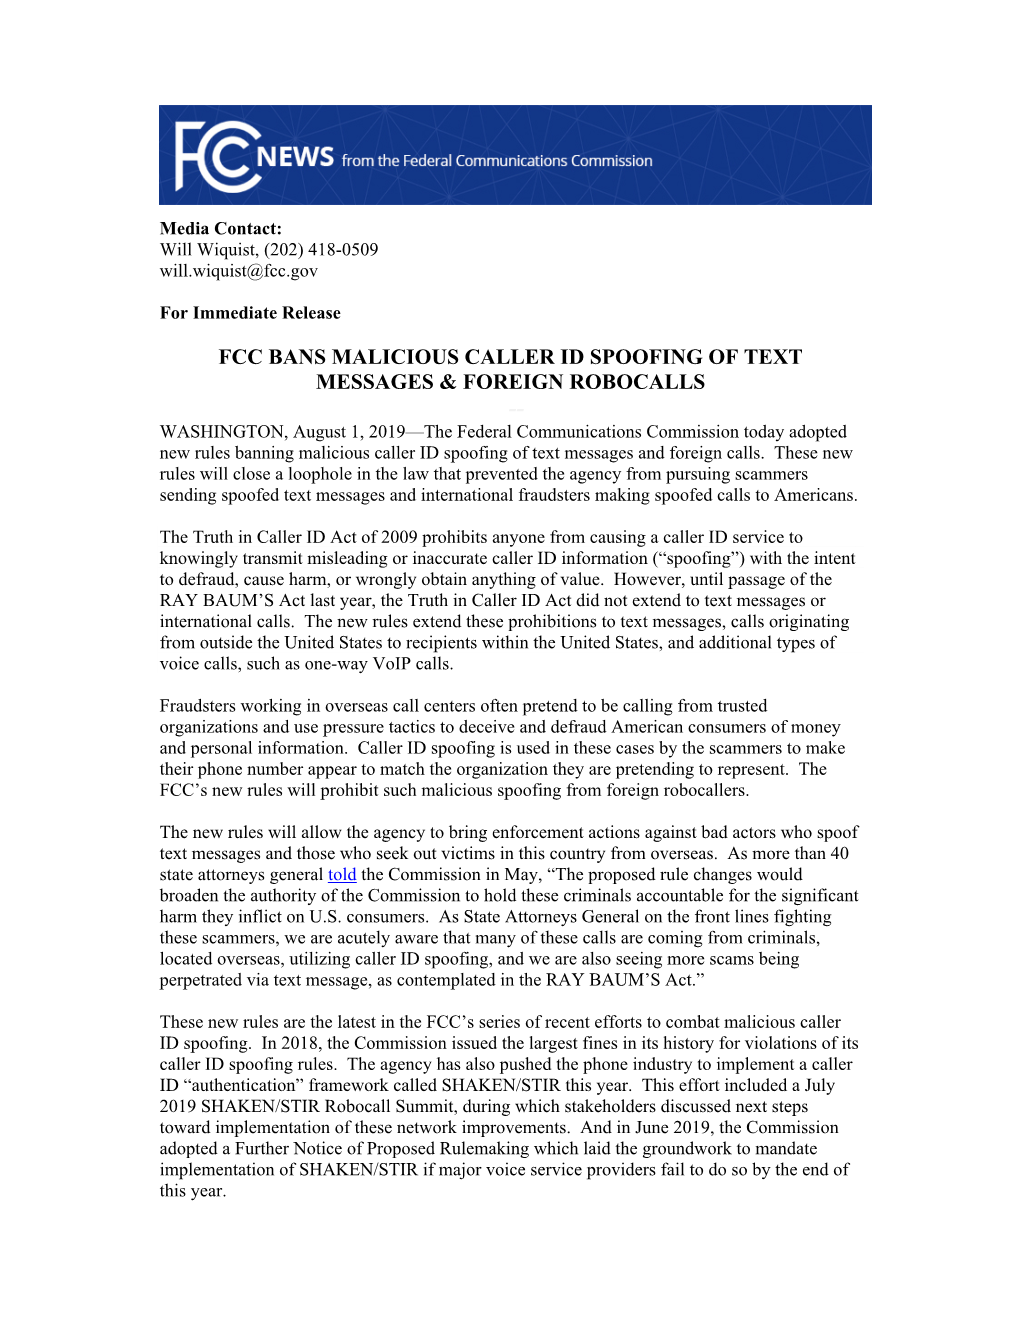 Fcc Bans Malicious Caller Id Spoofing of Text Messages & Foreign Robocalls